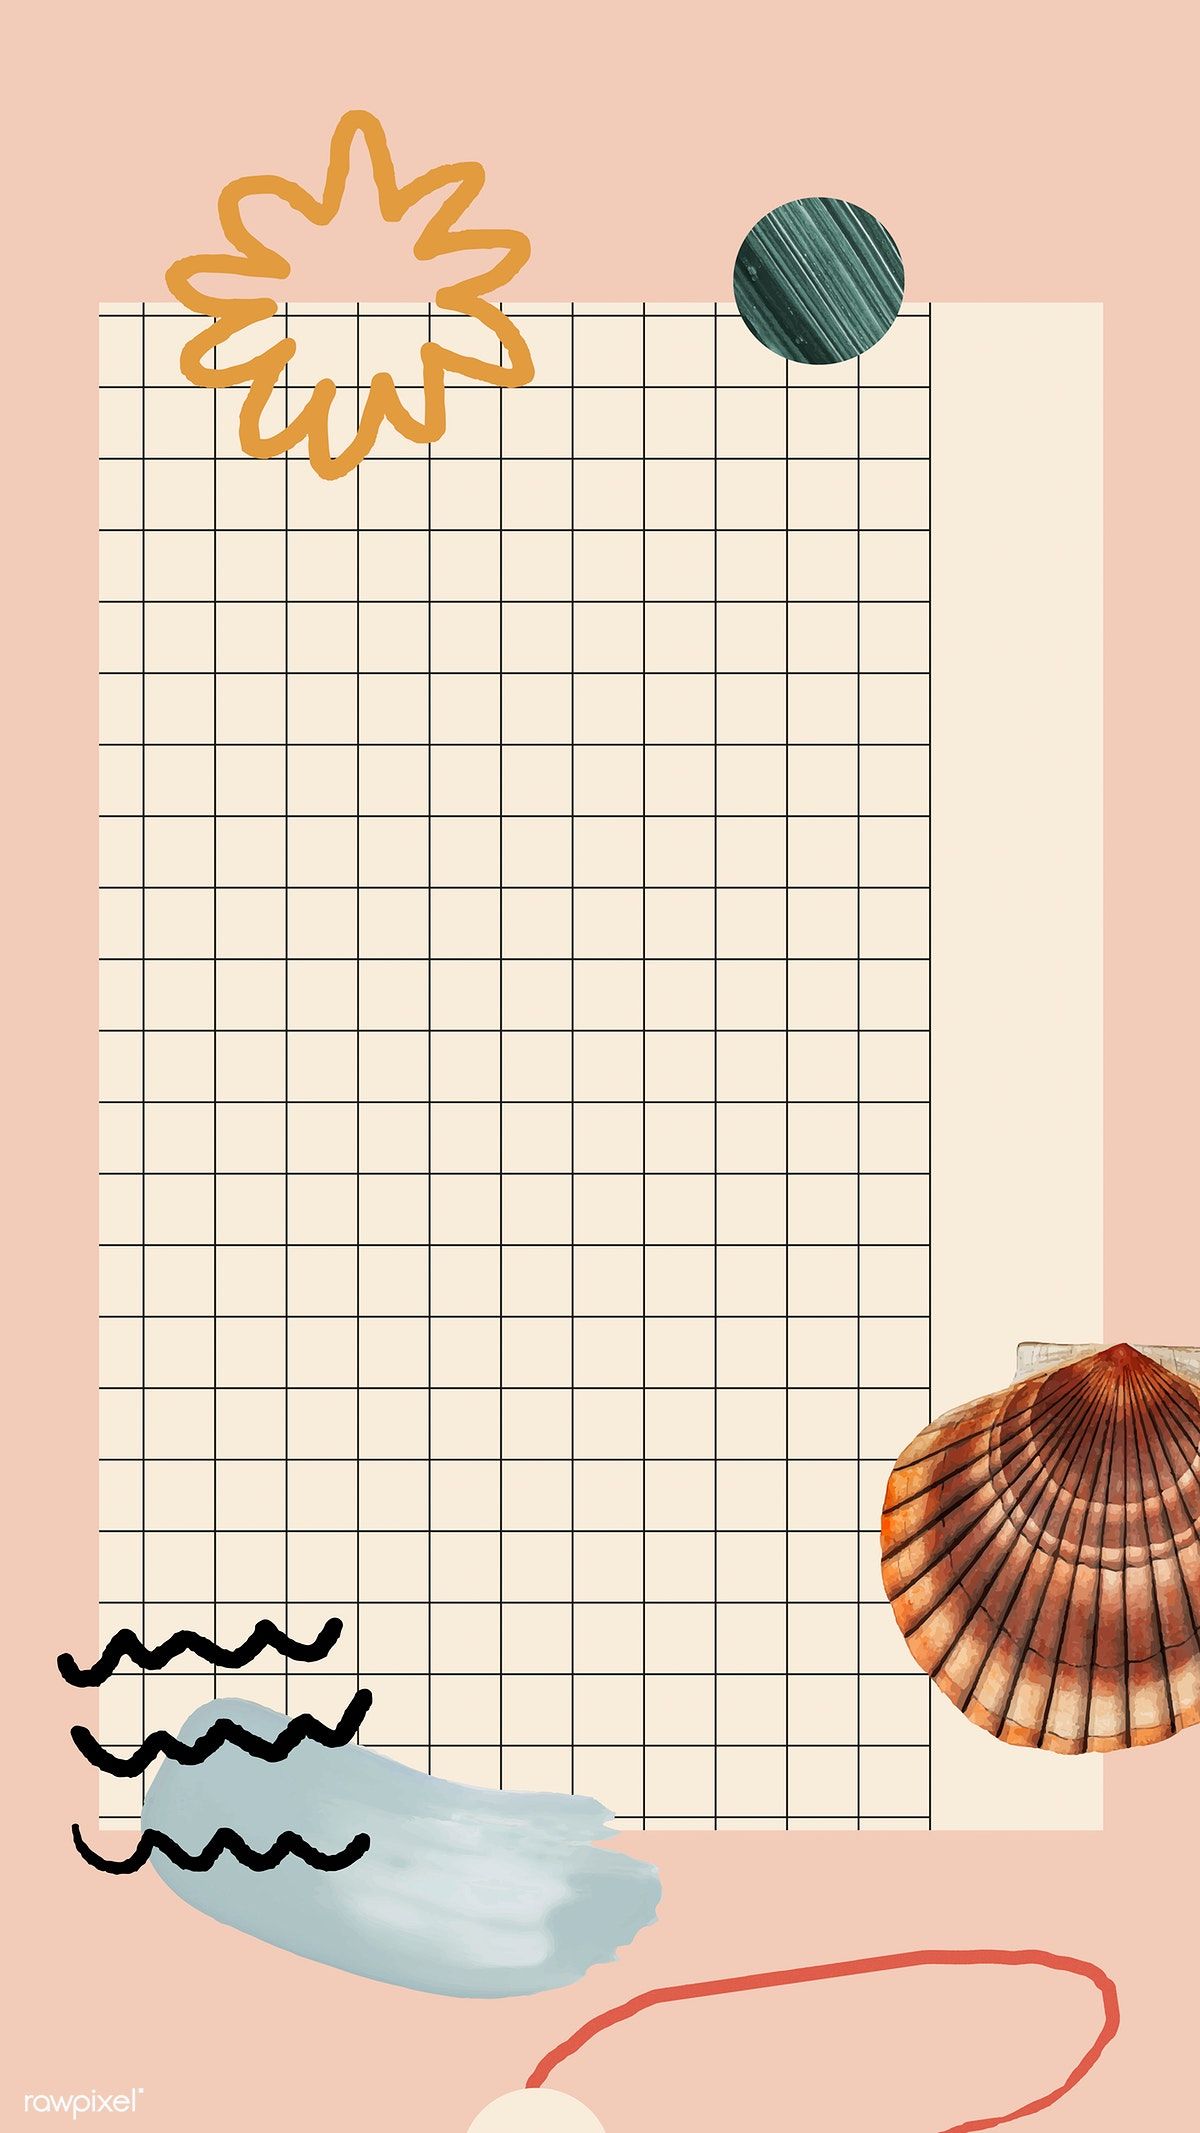 Premium Vector Of Clam Shell Pattern On Grid Mobile Phone